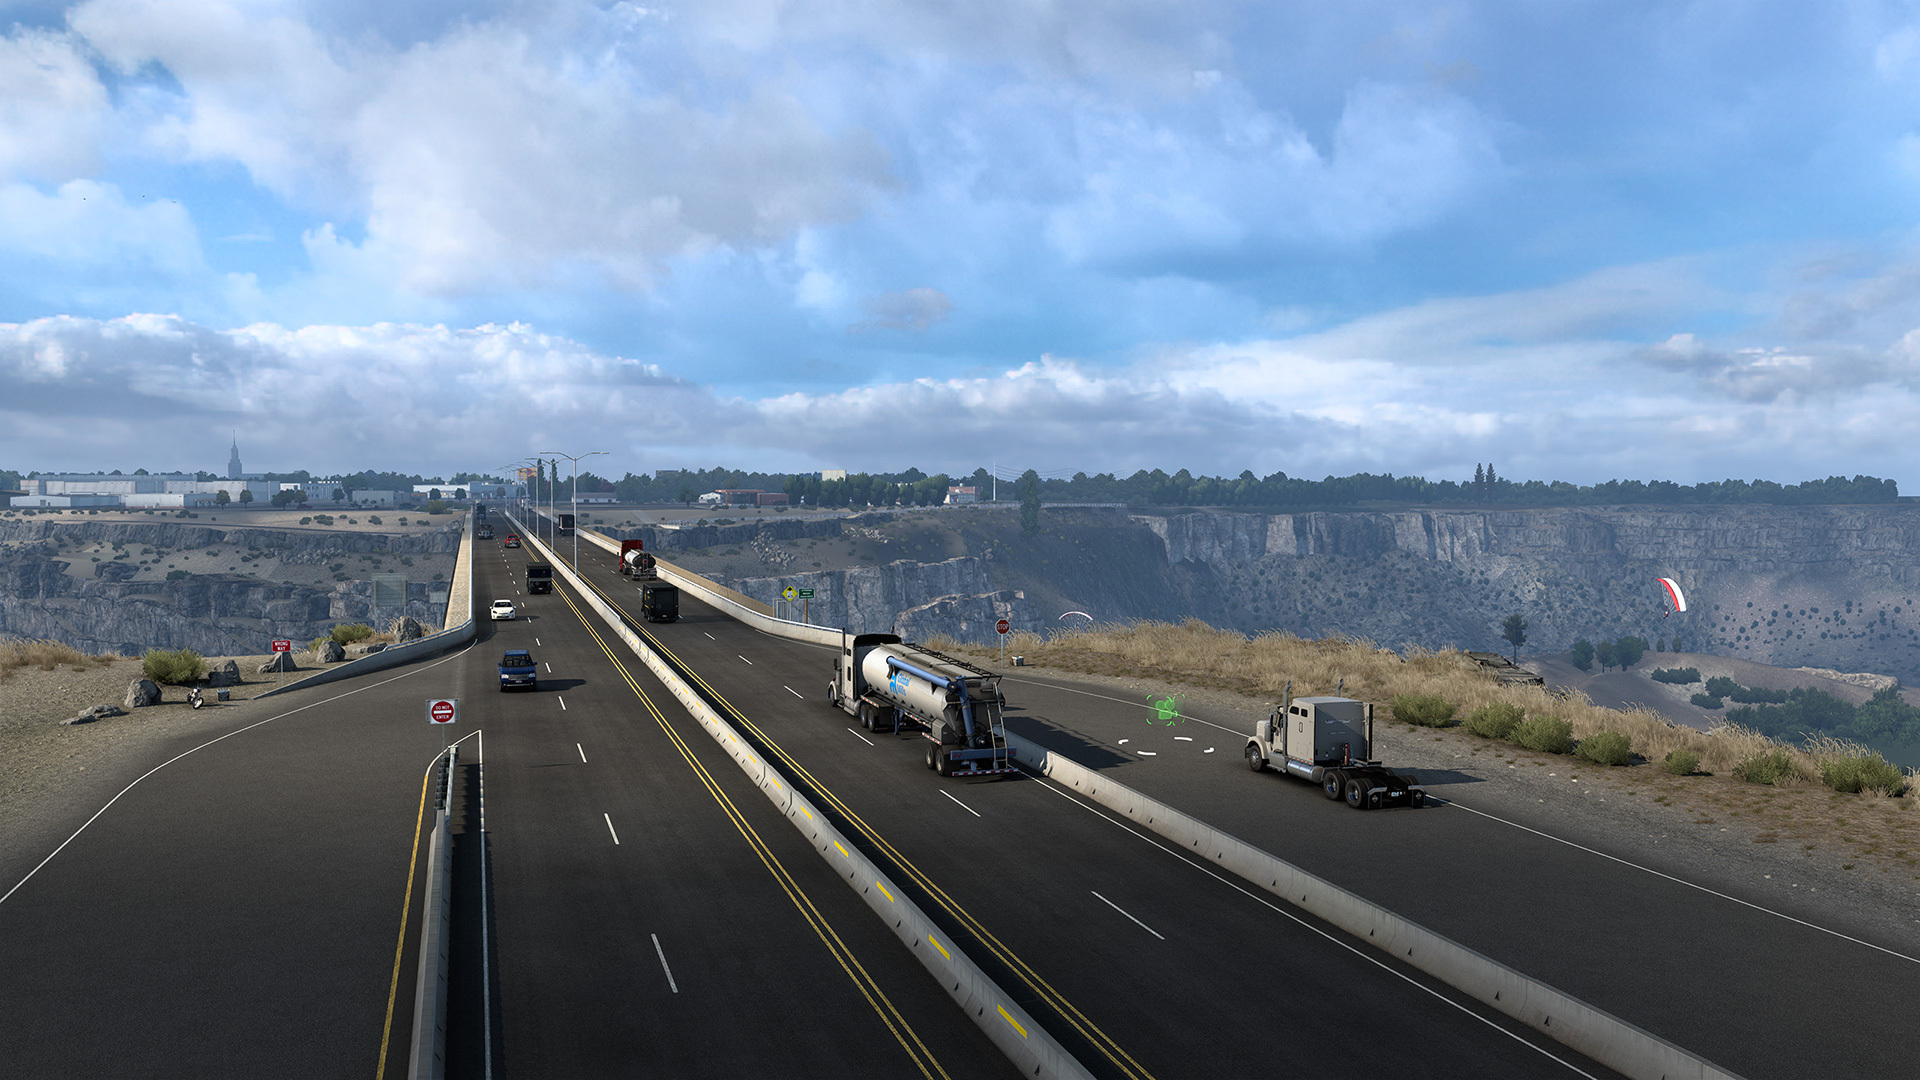 American Truck Simulator going sightseeing with Viewpoints